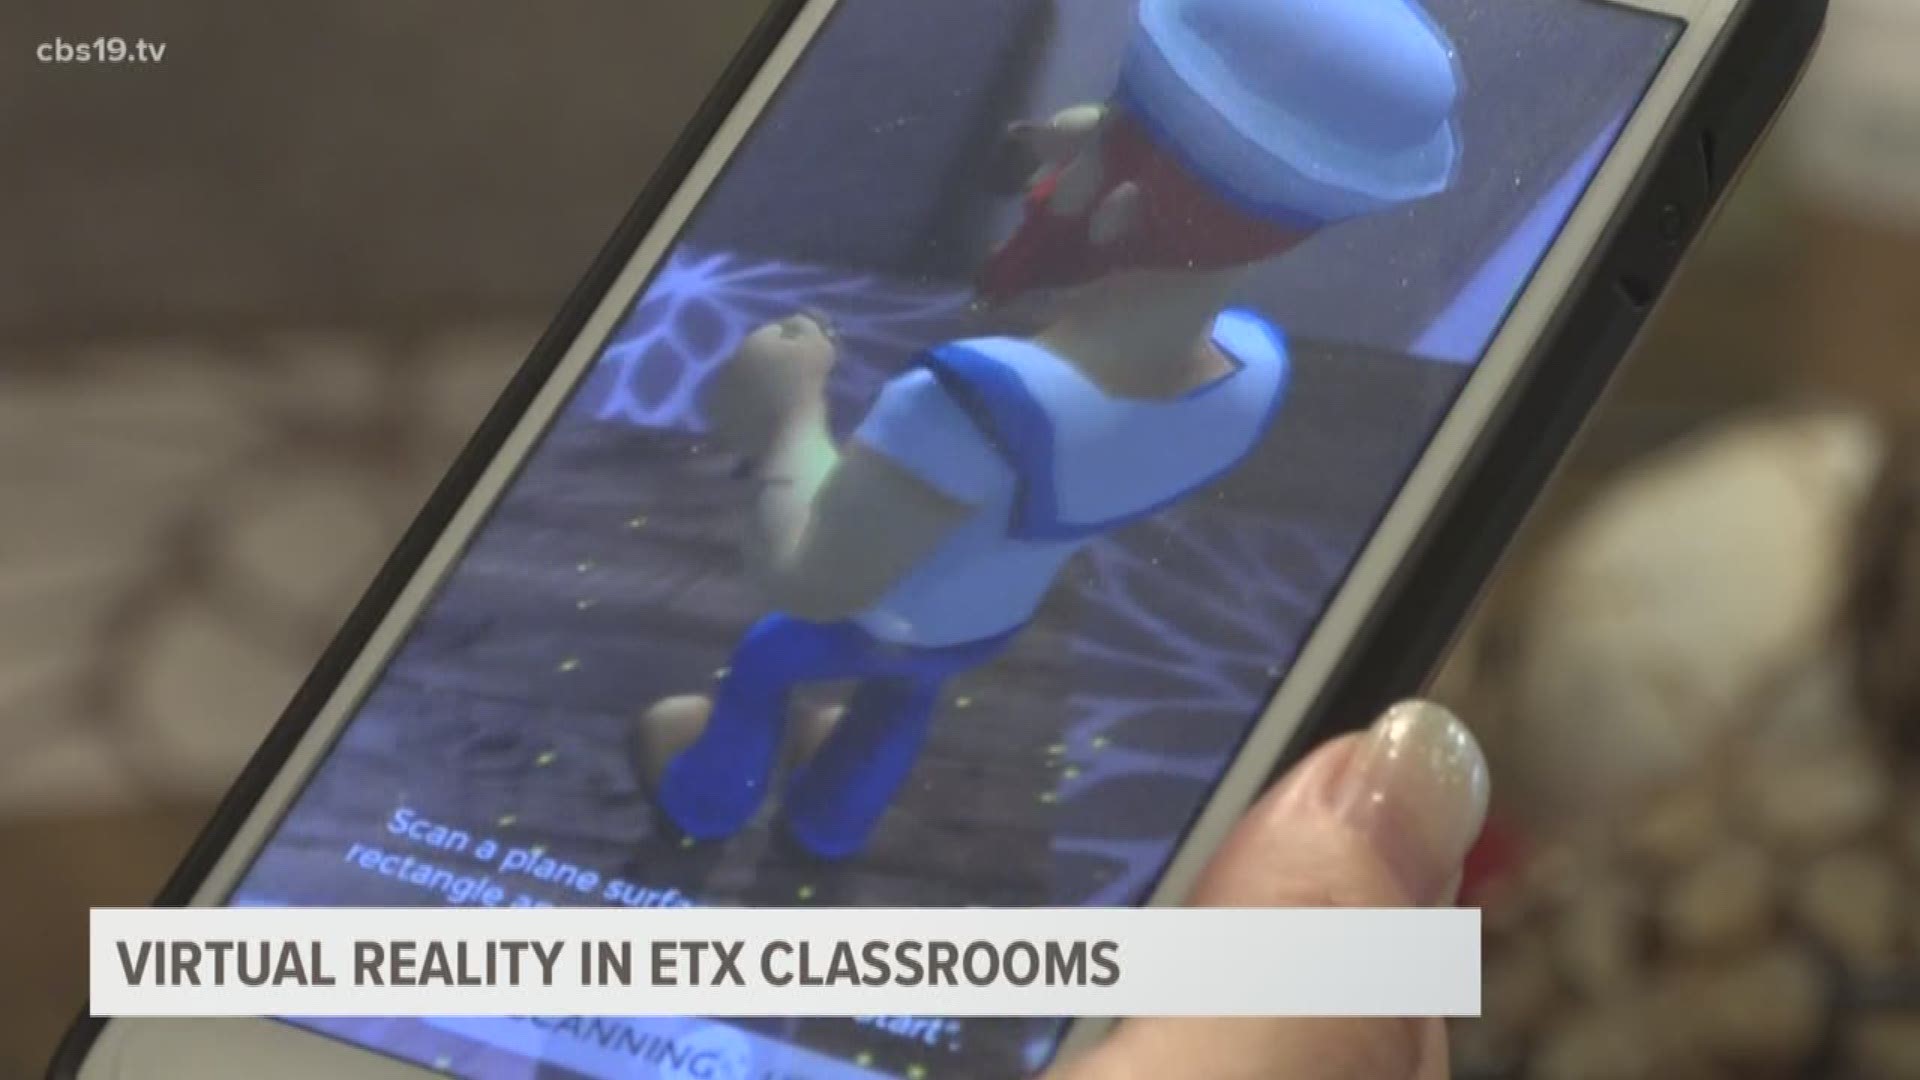 Former teacher brings virtual reality to ETX classrooms